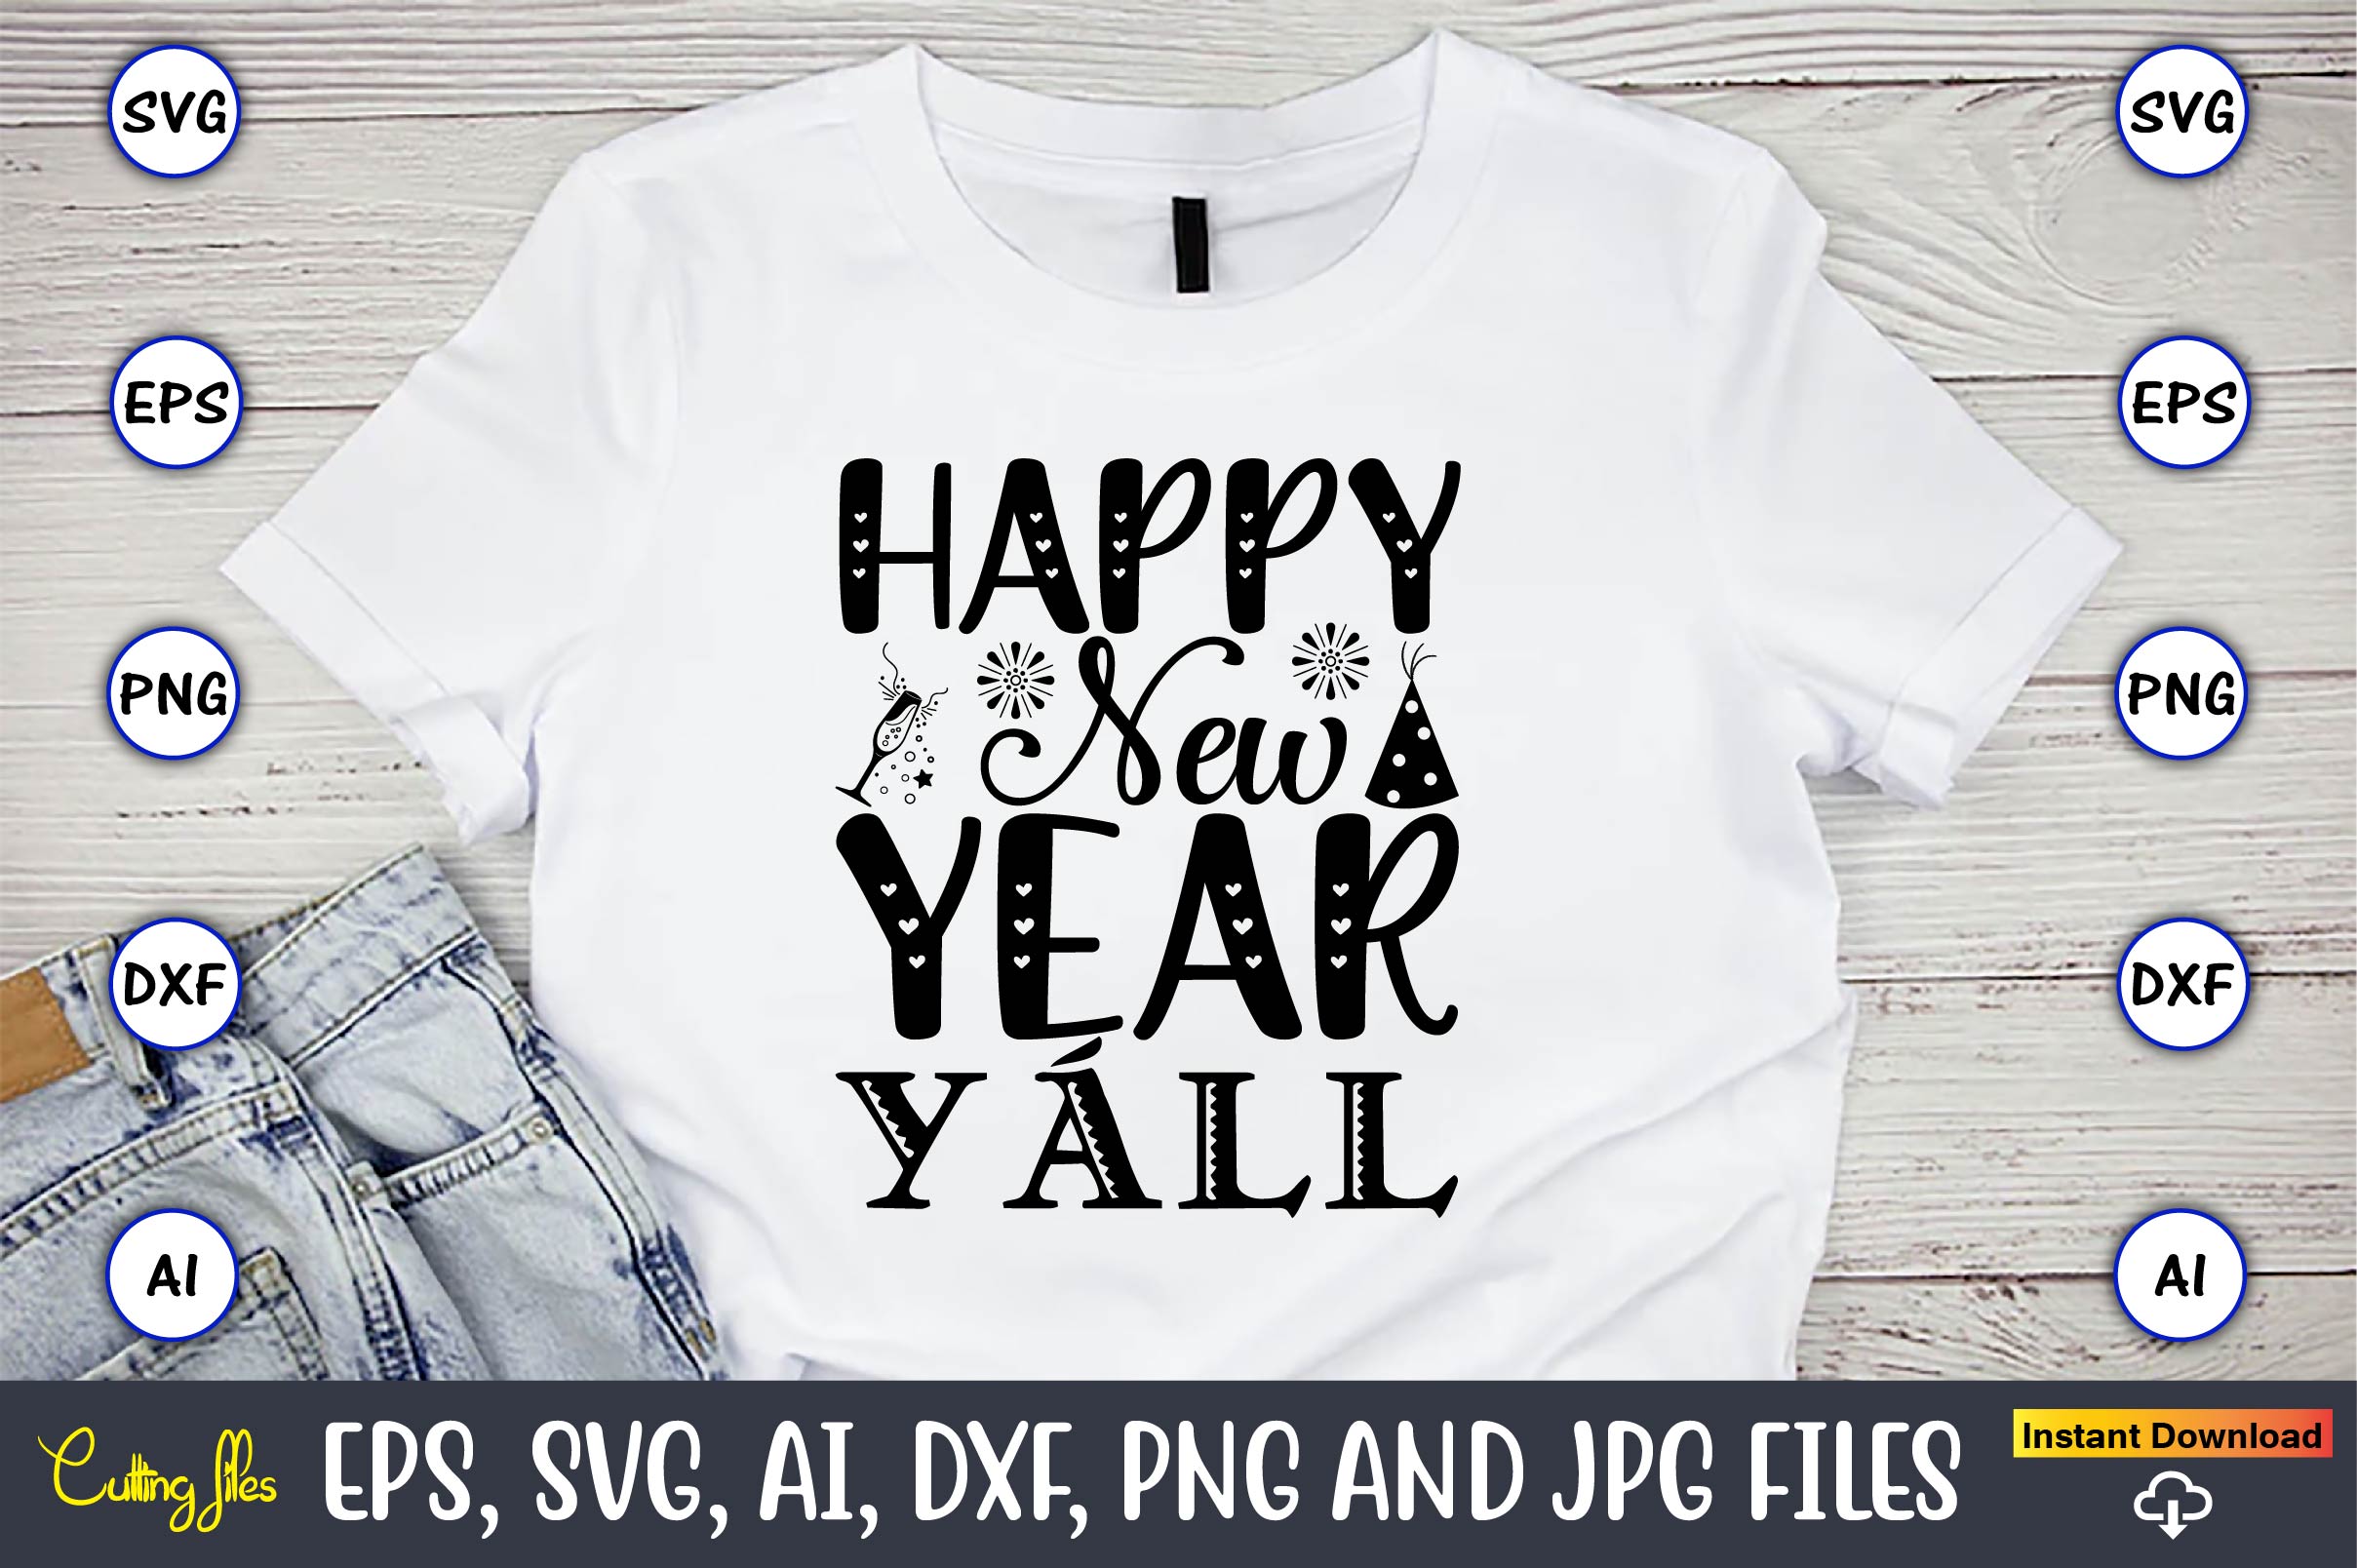 Image of a white t-shirt with an exquisite slogan Happy new year yáll.